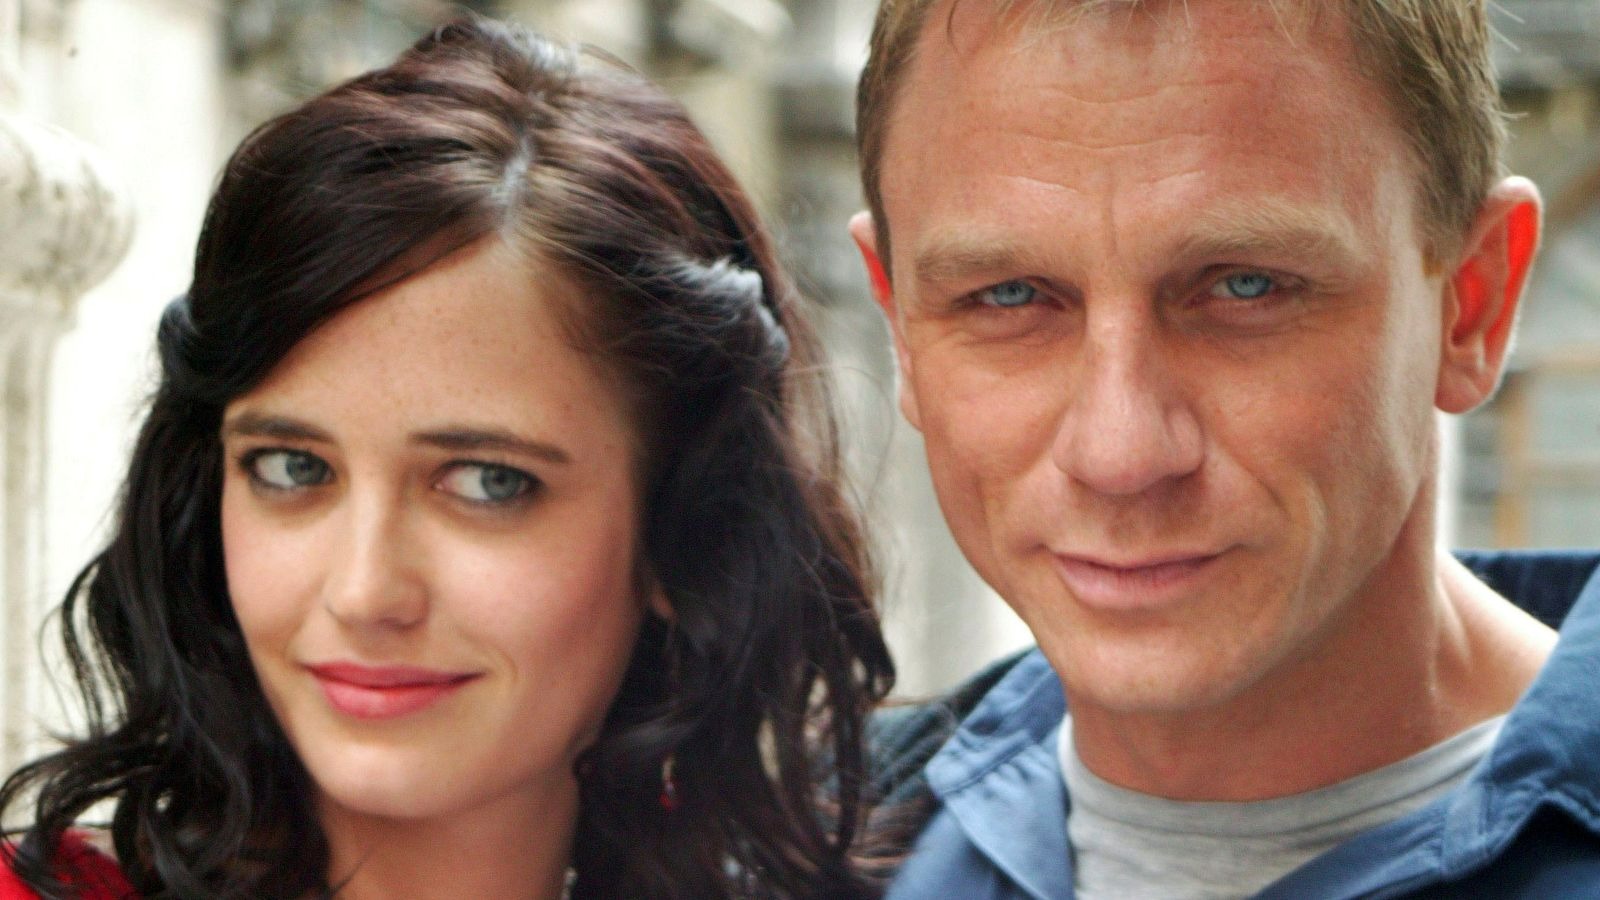 Daniel Craig starred with Eva Green in his first Bond film, Casino Royale, in 2006